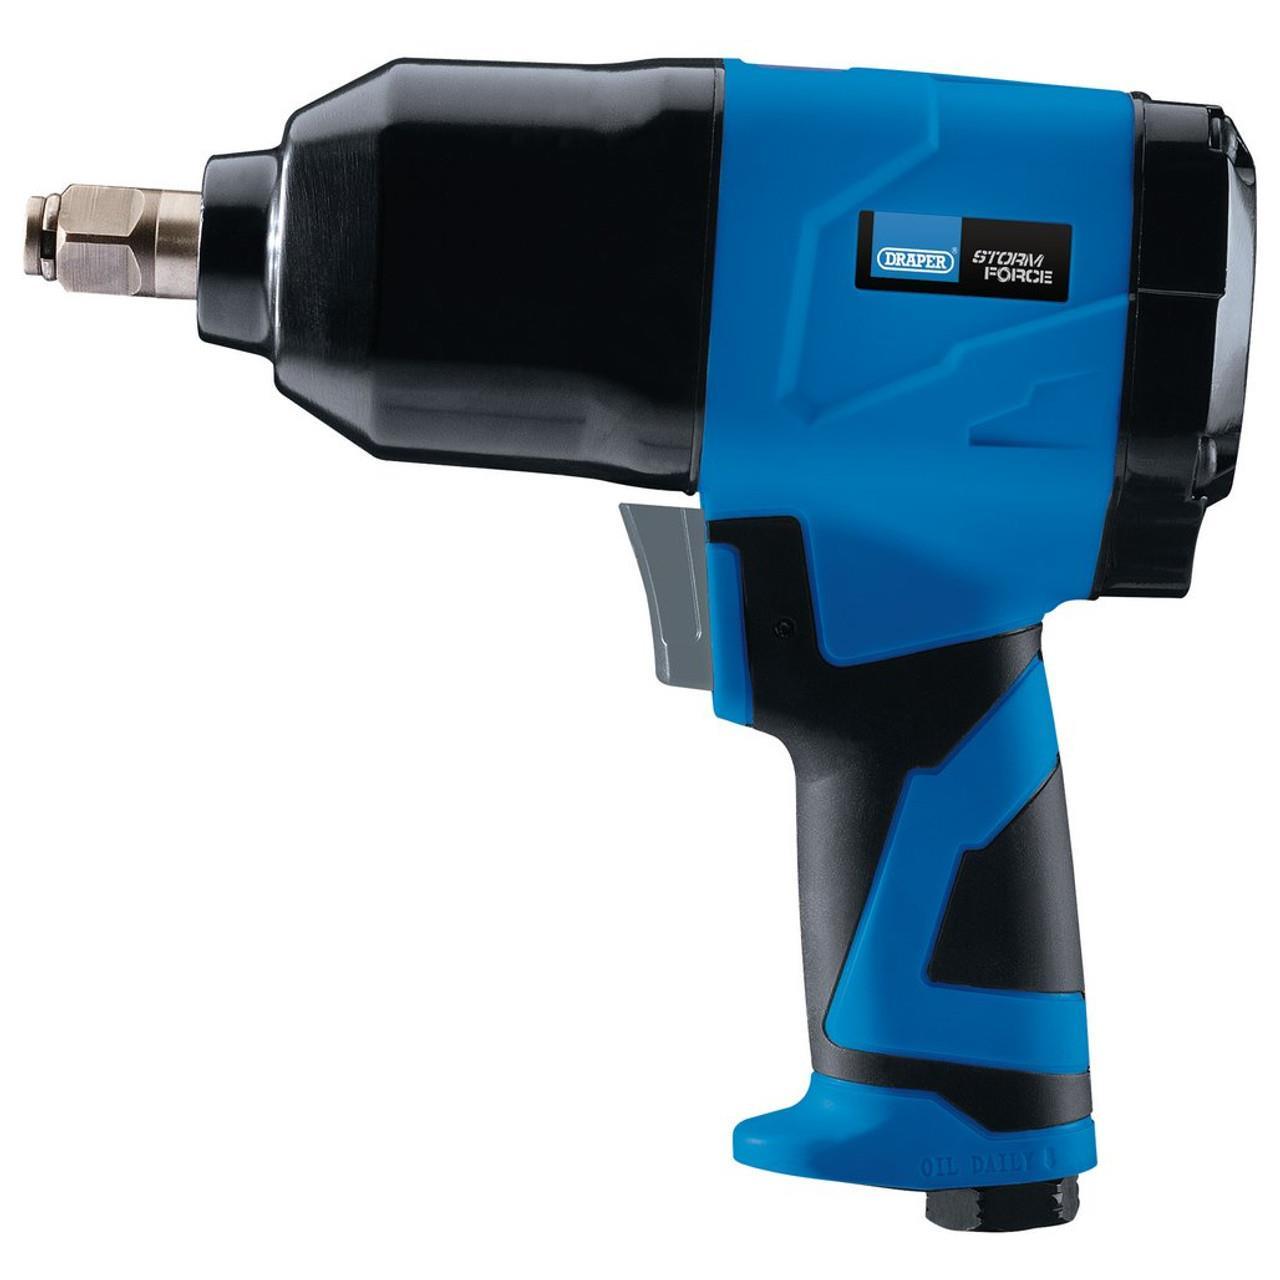 Draper Storm Force® 1/2" Sq. Dr. Air Impact Wrench with Composite Body 65017 - Tools 2U Direct SW